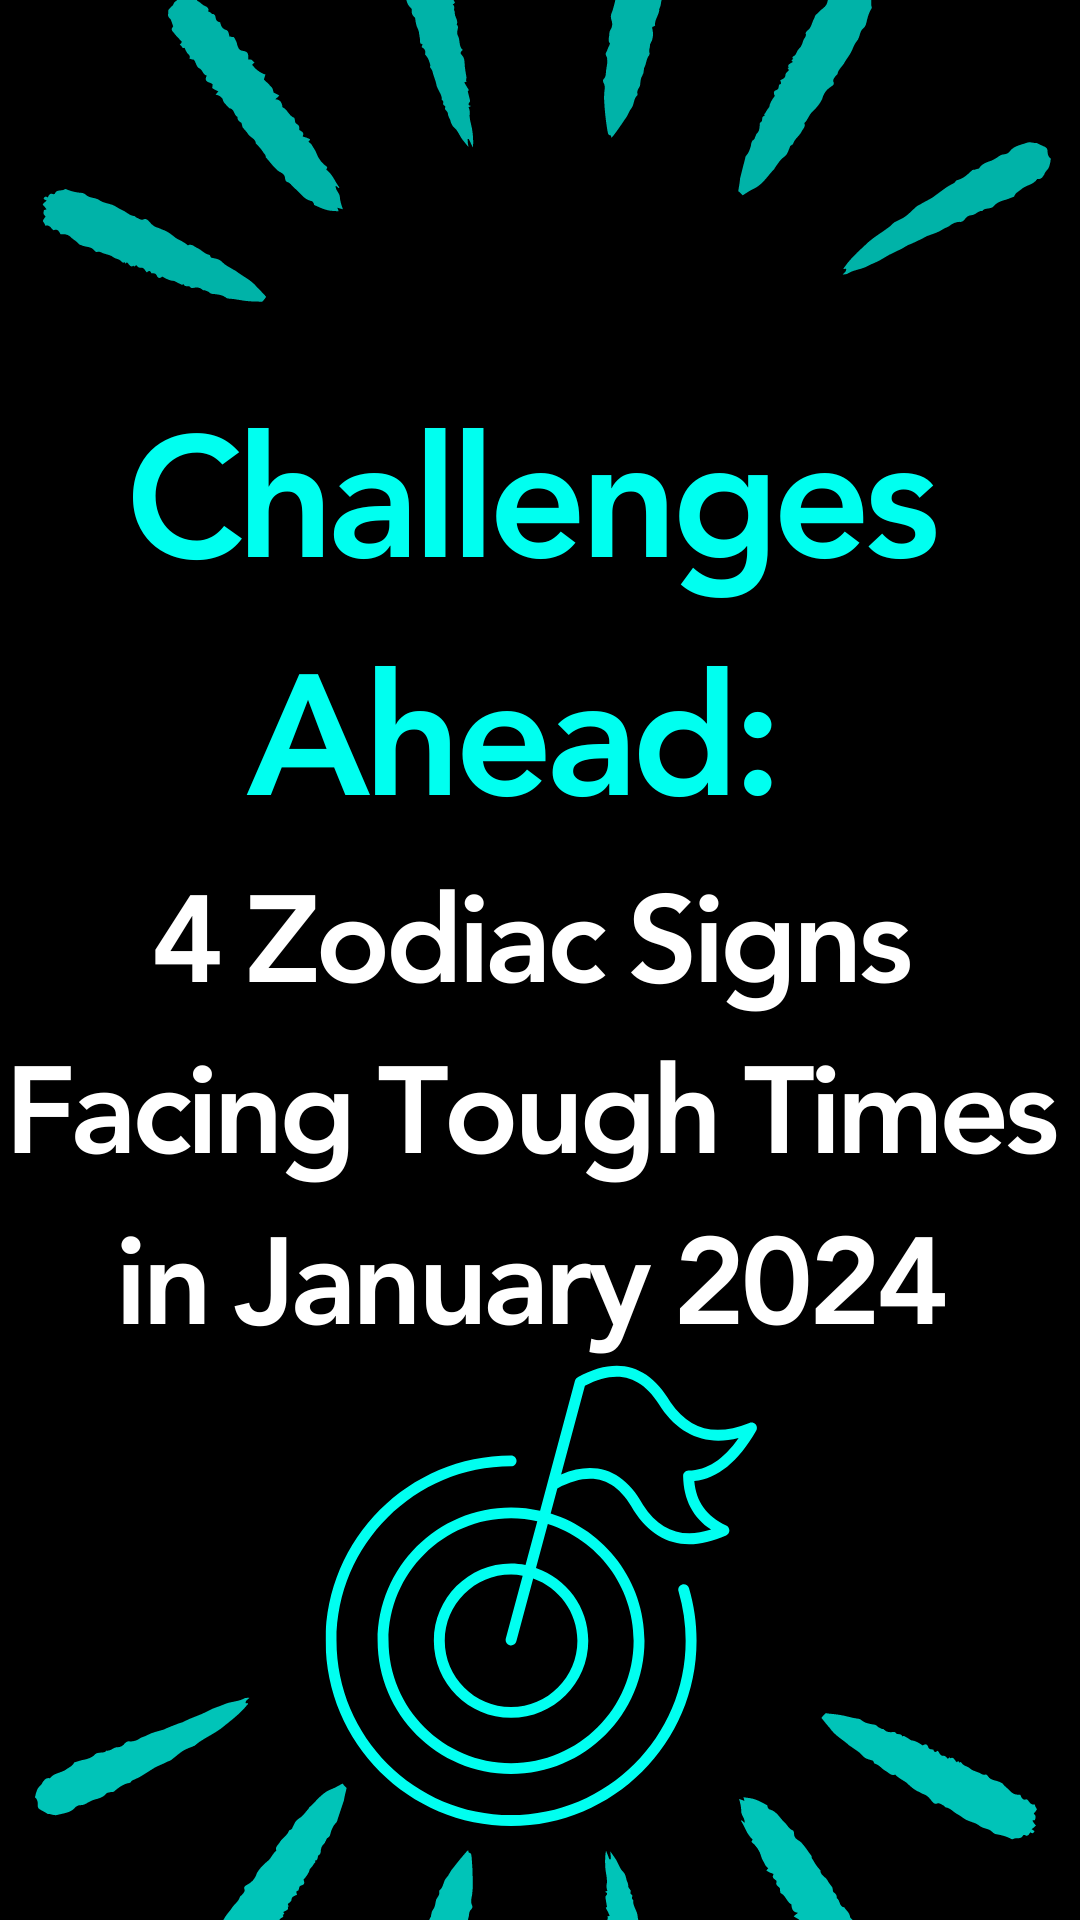 Challenges Ahead: 4 Zodiac Signs Facing Tough Times in January 2024